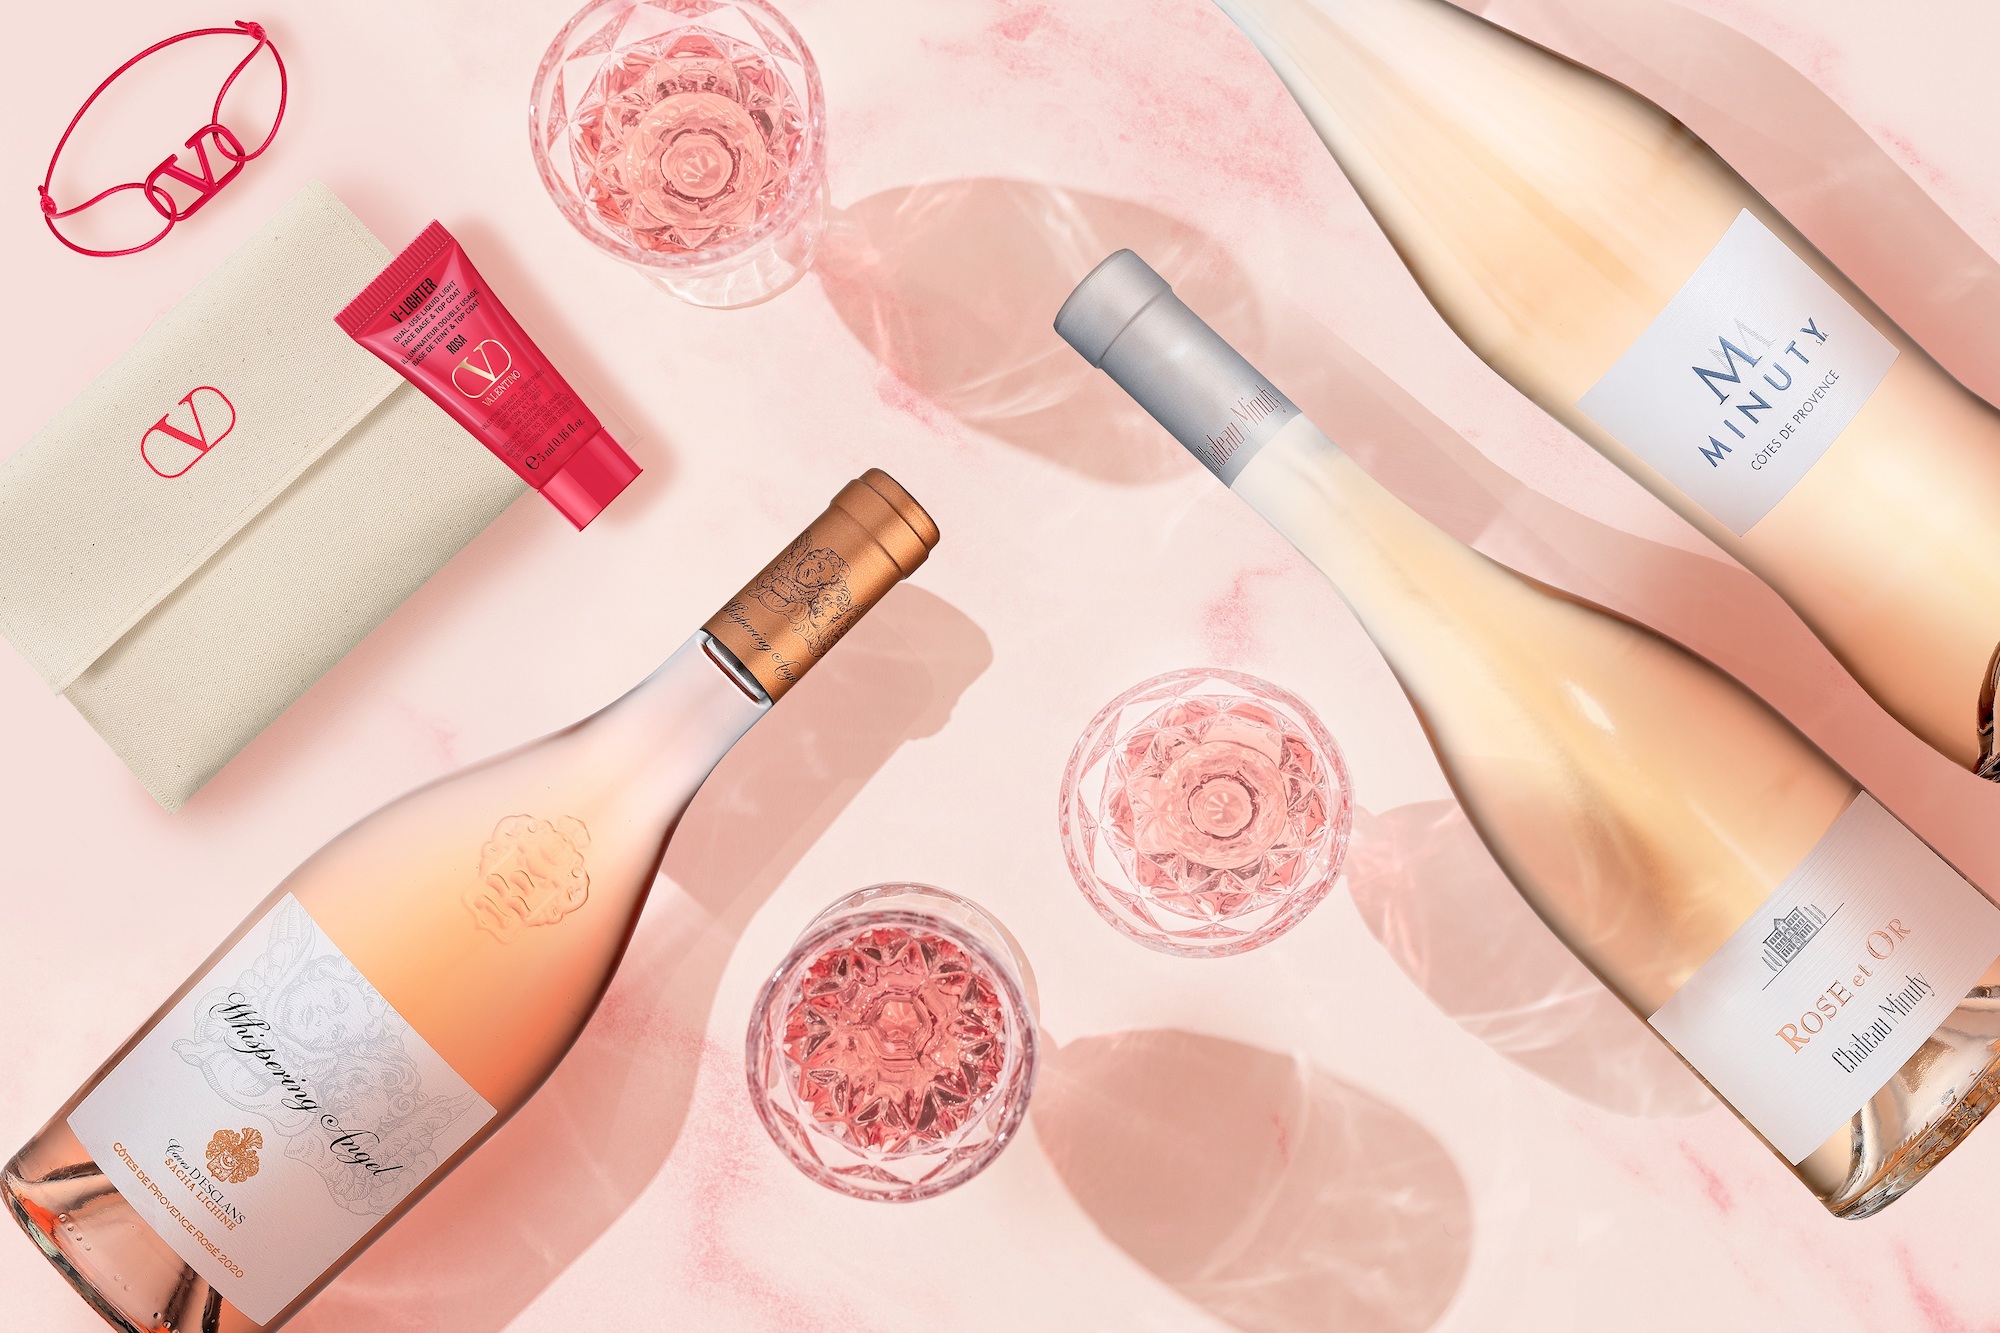 The Manor x MHD x Valentino Beauty Rose wine promotion